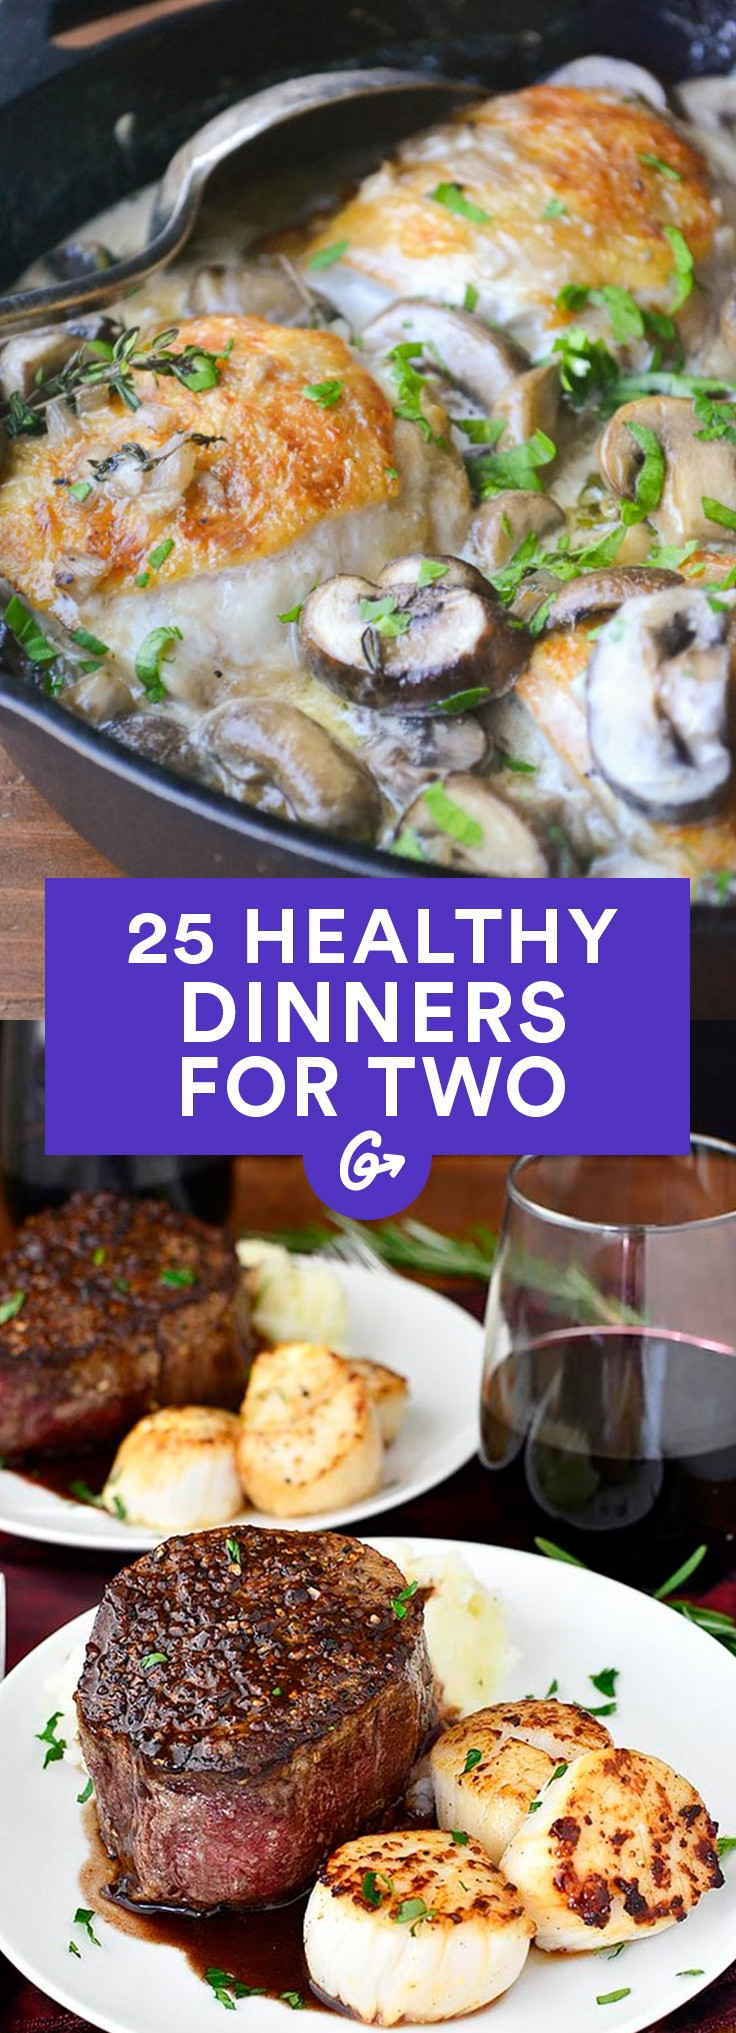 Fast Dinners For Two
 Healthy Dinner Recipes for Two